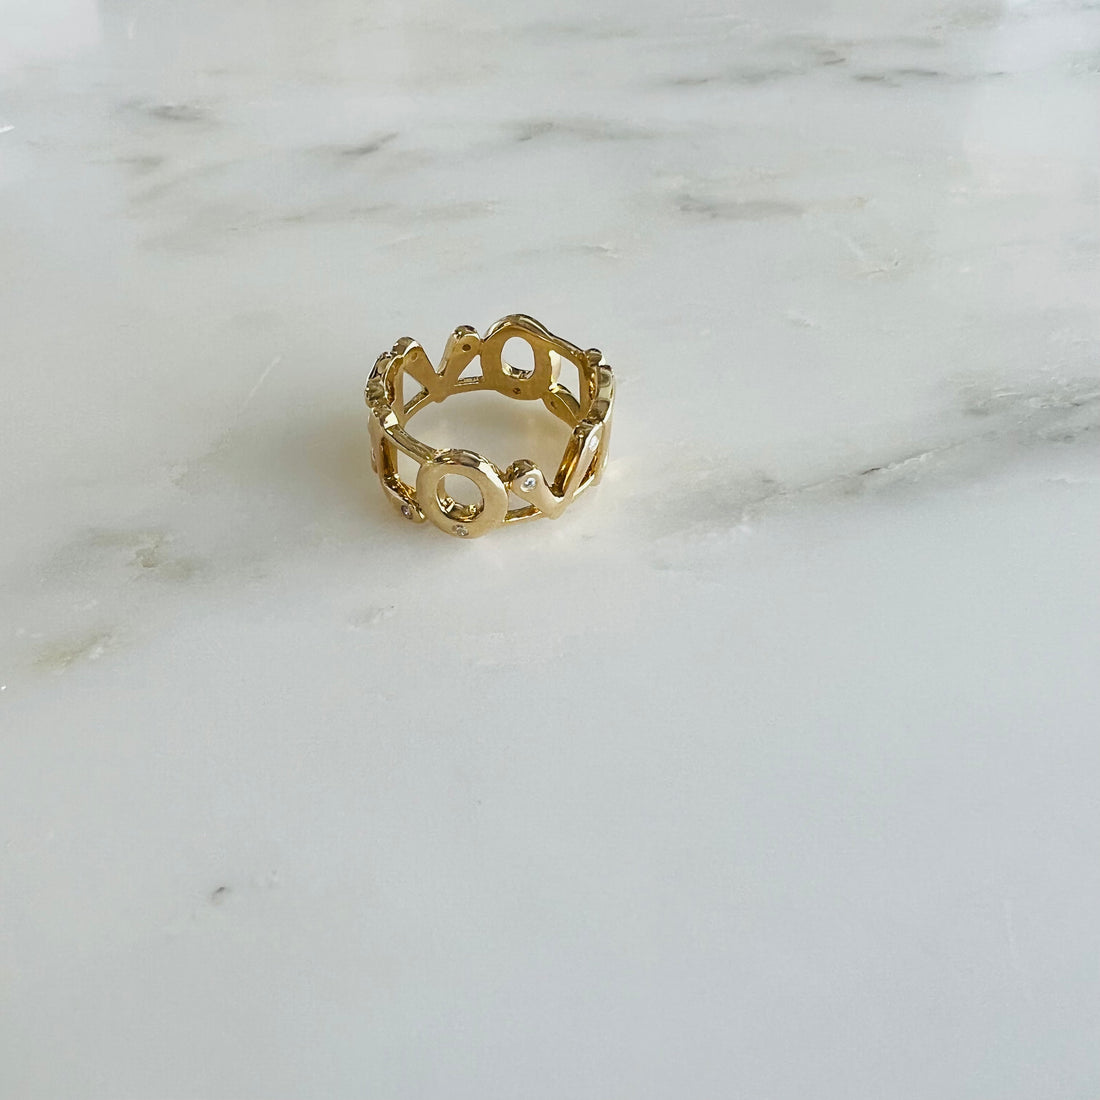 Love diamond and gold ring